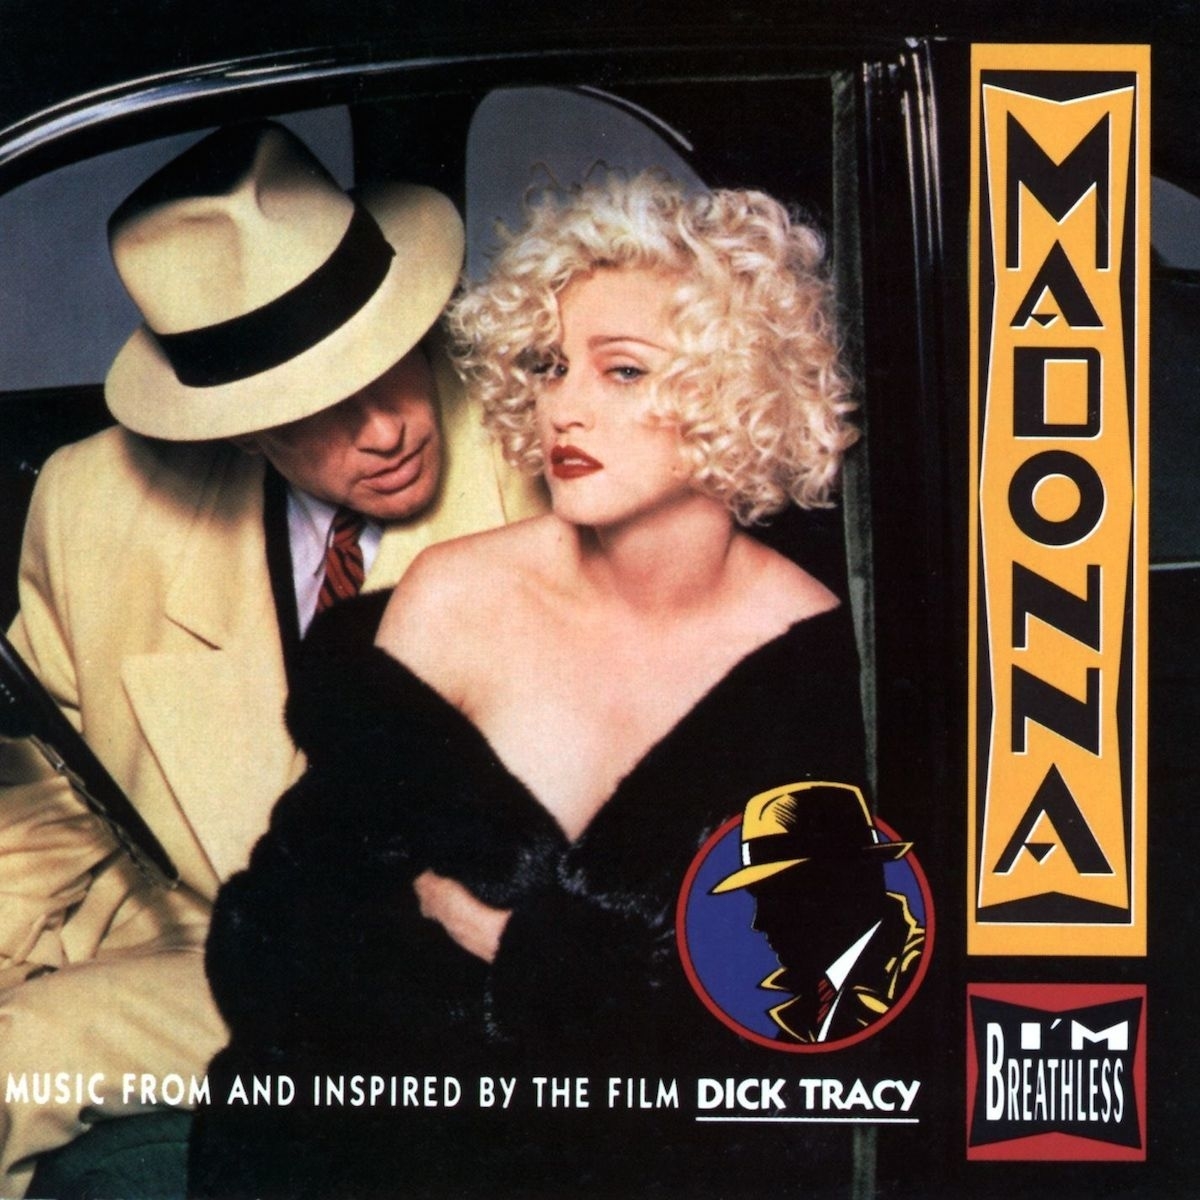 Warren and Madonna from the Dick Tracy soundtrack